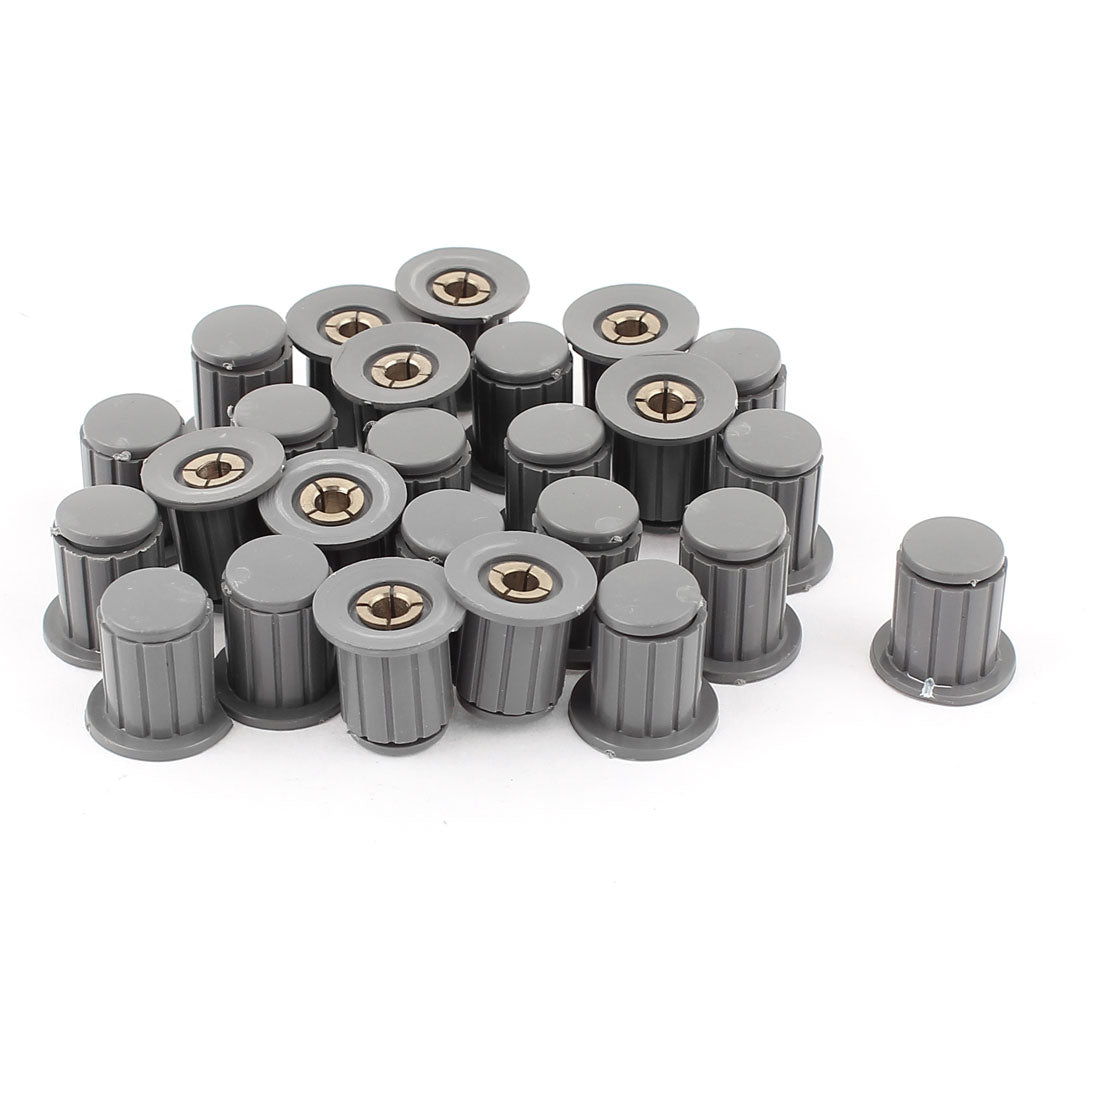 uxcell Uxcell 25 Pcs 4mm Shaft Insert Dia Brass Tone Core Potentiometer Control Knobs